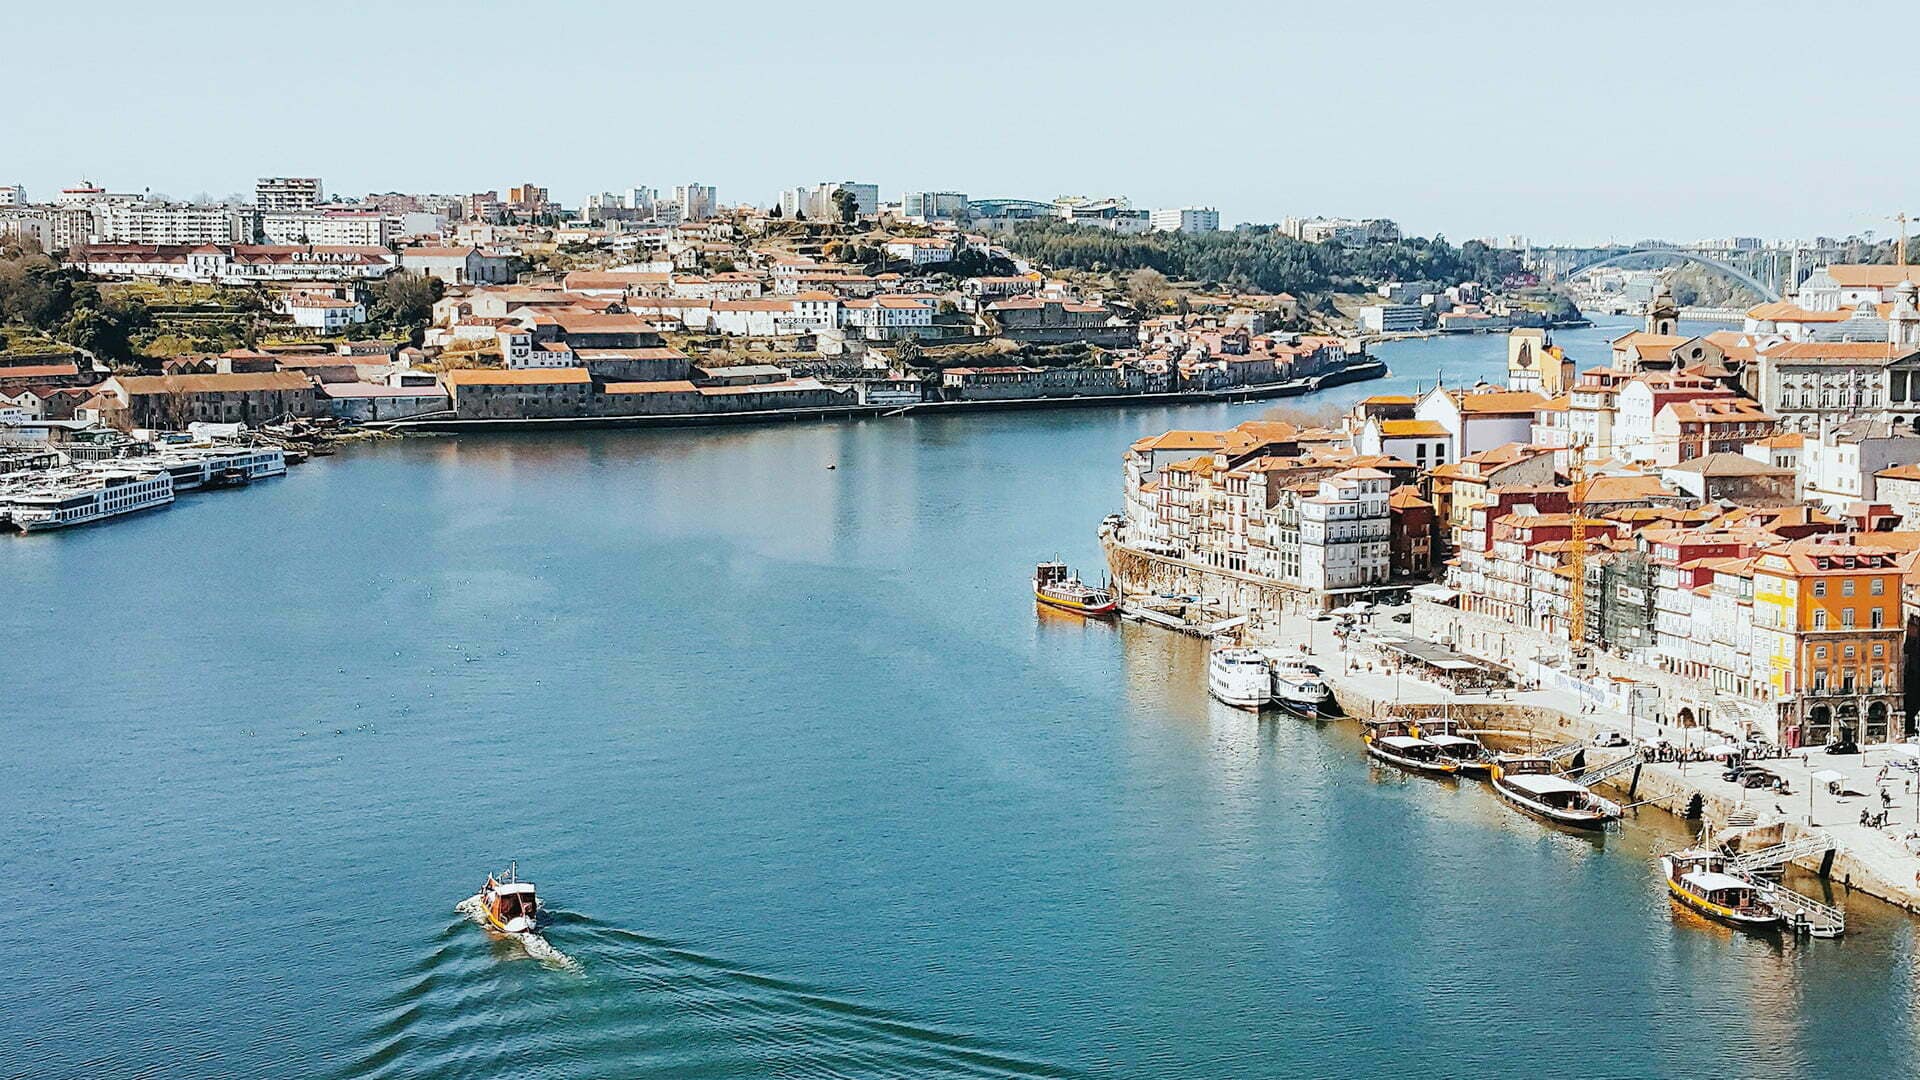 Stunning waterfront cityscape of Porto, Portugal, showcasing its vibrant real estate scene with a mix of modern high-rises and colorful historic buildings nestled along the Douro River.